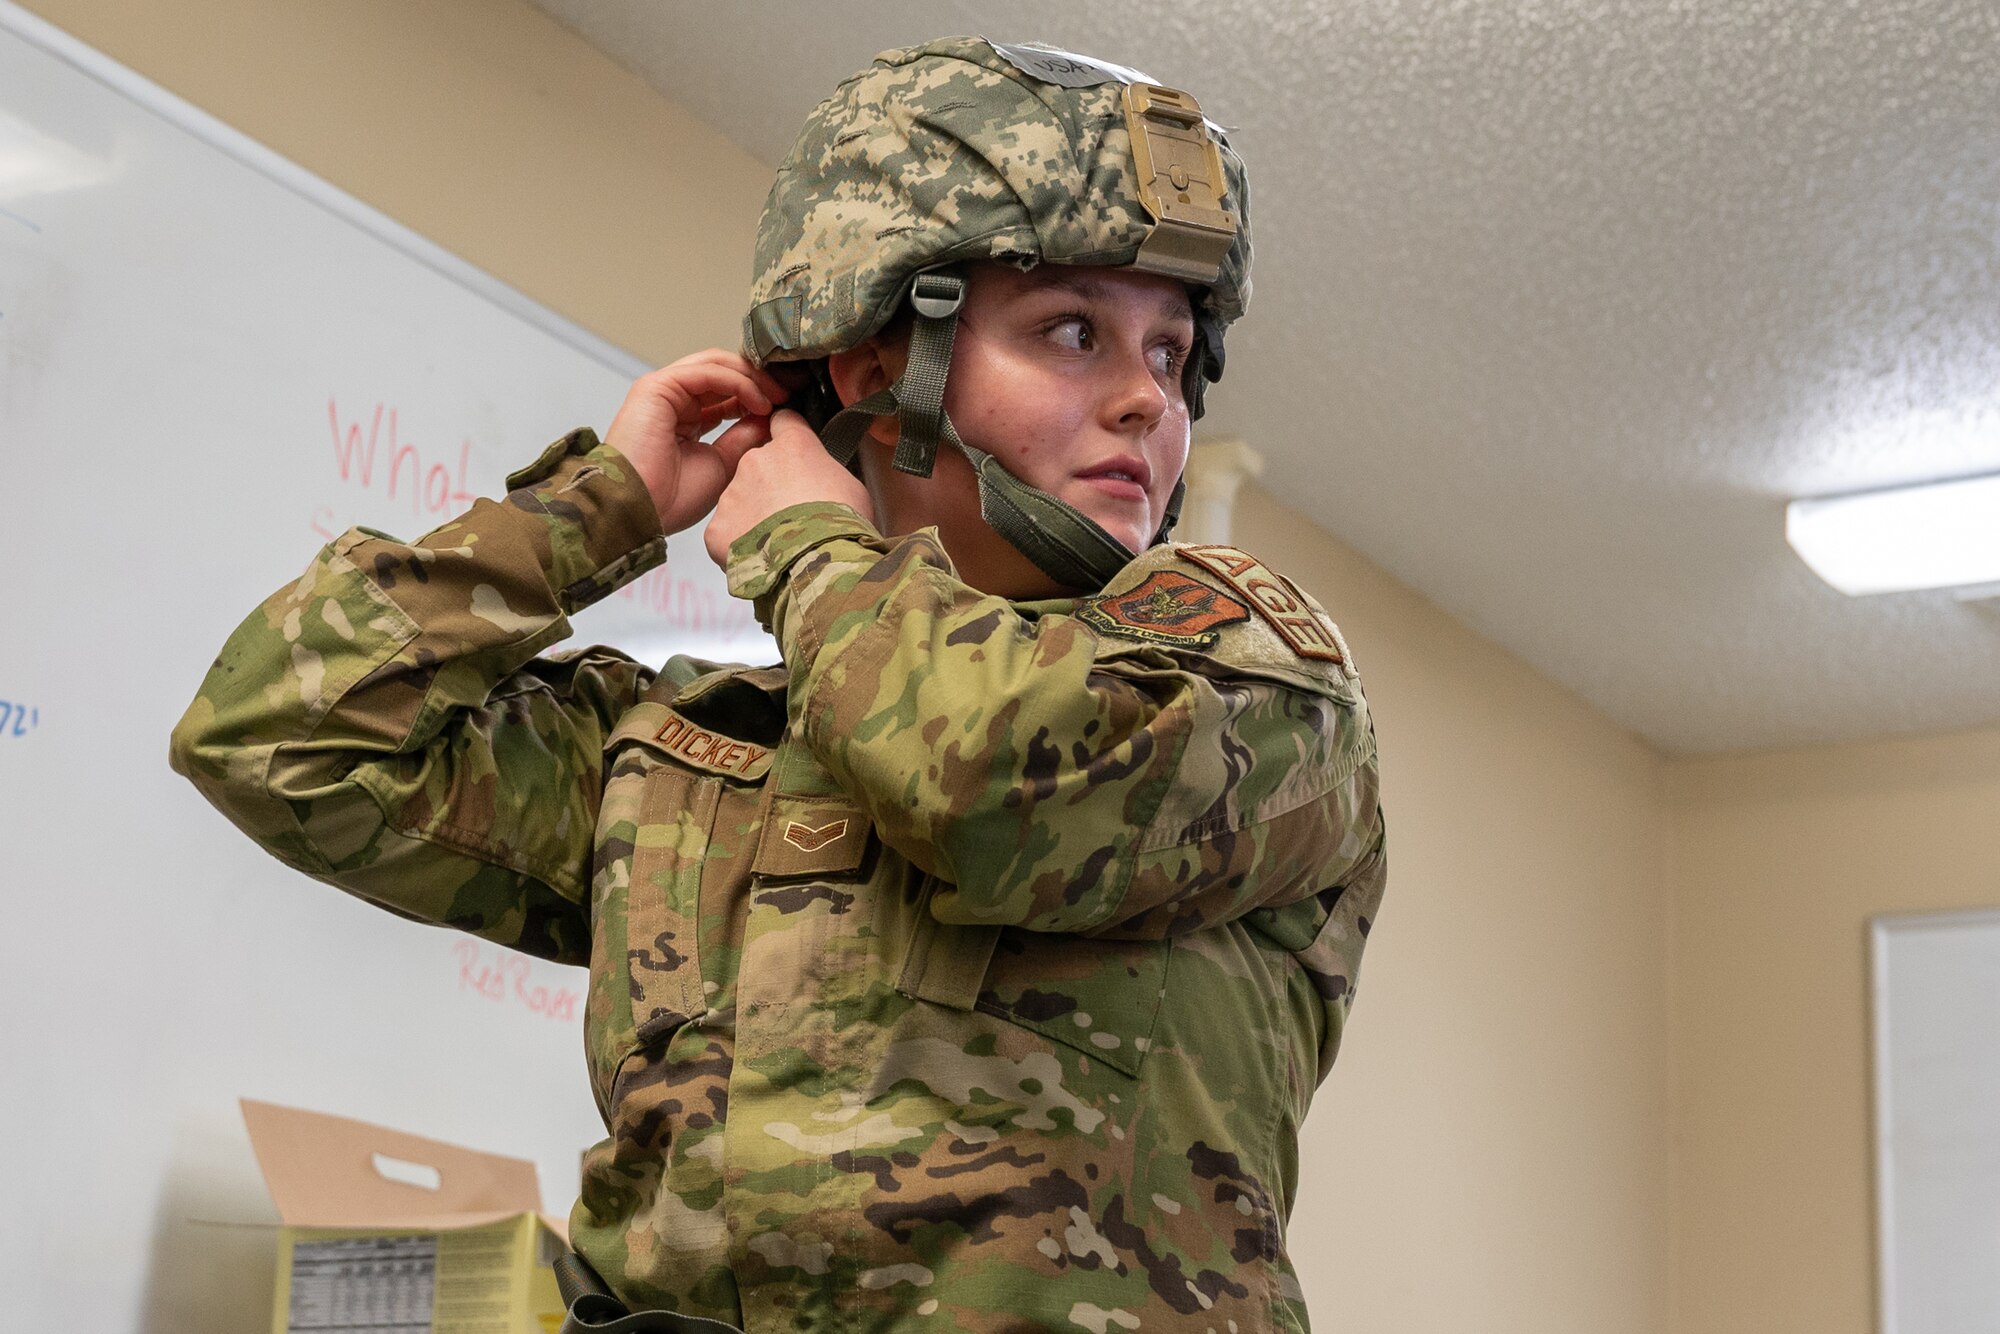 Senior Airman Tess Dickey, a 934th Maintenance Squadron aerospace ground equipment specialist, dons her helmet during an exercise at Volk Field Air National Guard Base, Wis., April 6, 2022. The exercise involves week-long training with the 934th personnel to maintain and display readiness. (U.S. Air Force photo by Staff Sgt. Timothy Leddick)